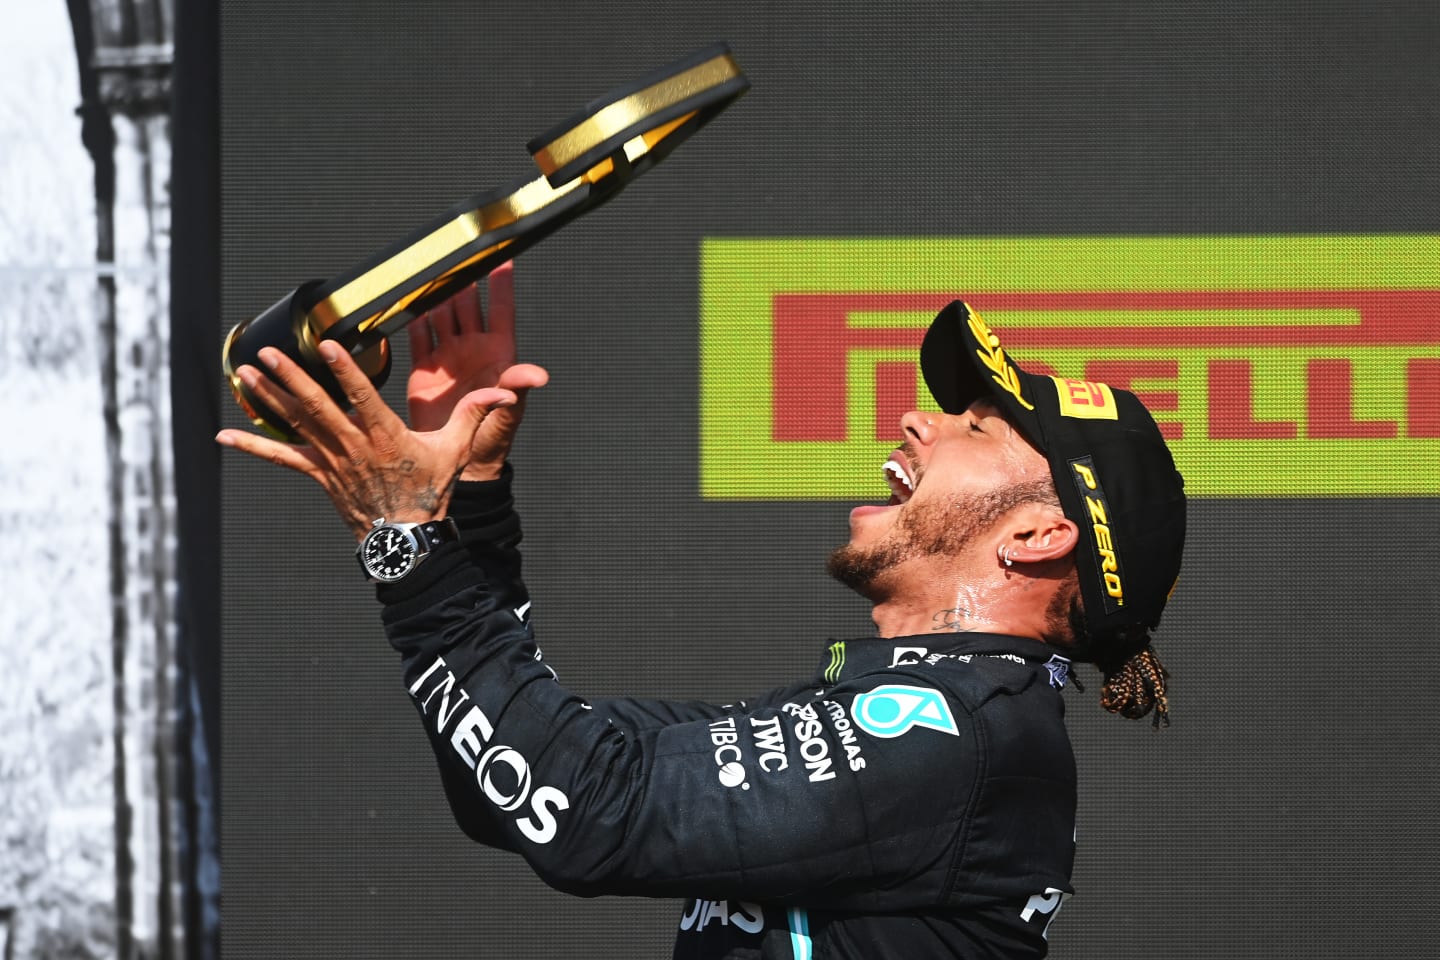 NORTHAMPTON, ENGLAND - JULY 18: Race winner Lewis Hamilton of Great Britain and Mercedes GP celebrates on the podium during the F1 Grand Prix of Great Britain at Silverstone on July 18, 2021 in Northampton, England. (Photo by Michael Regan/Getty Images)